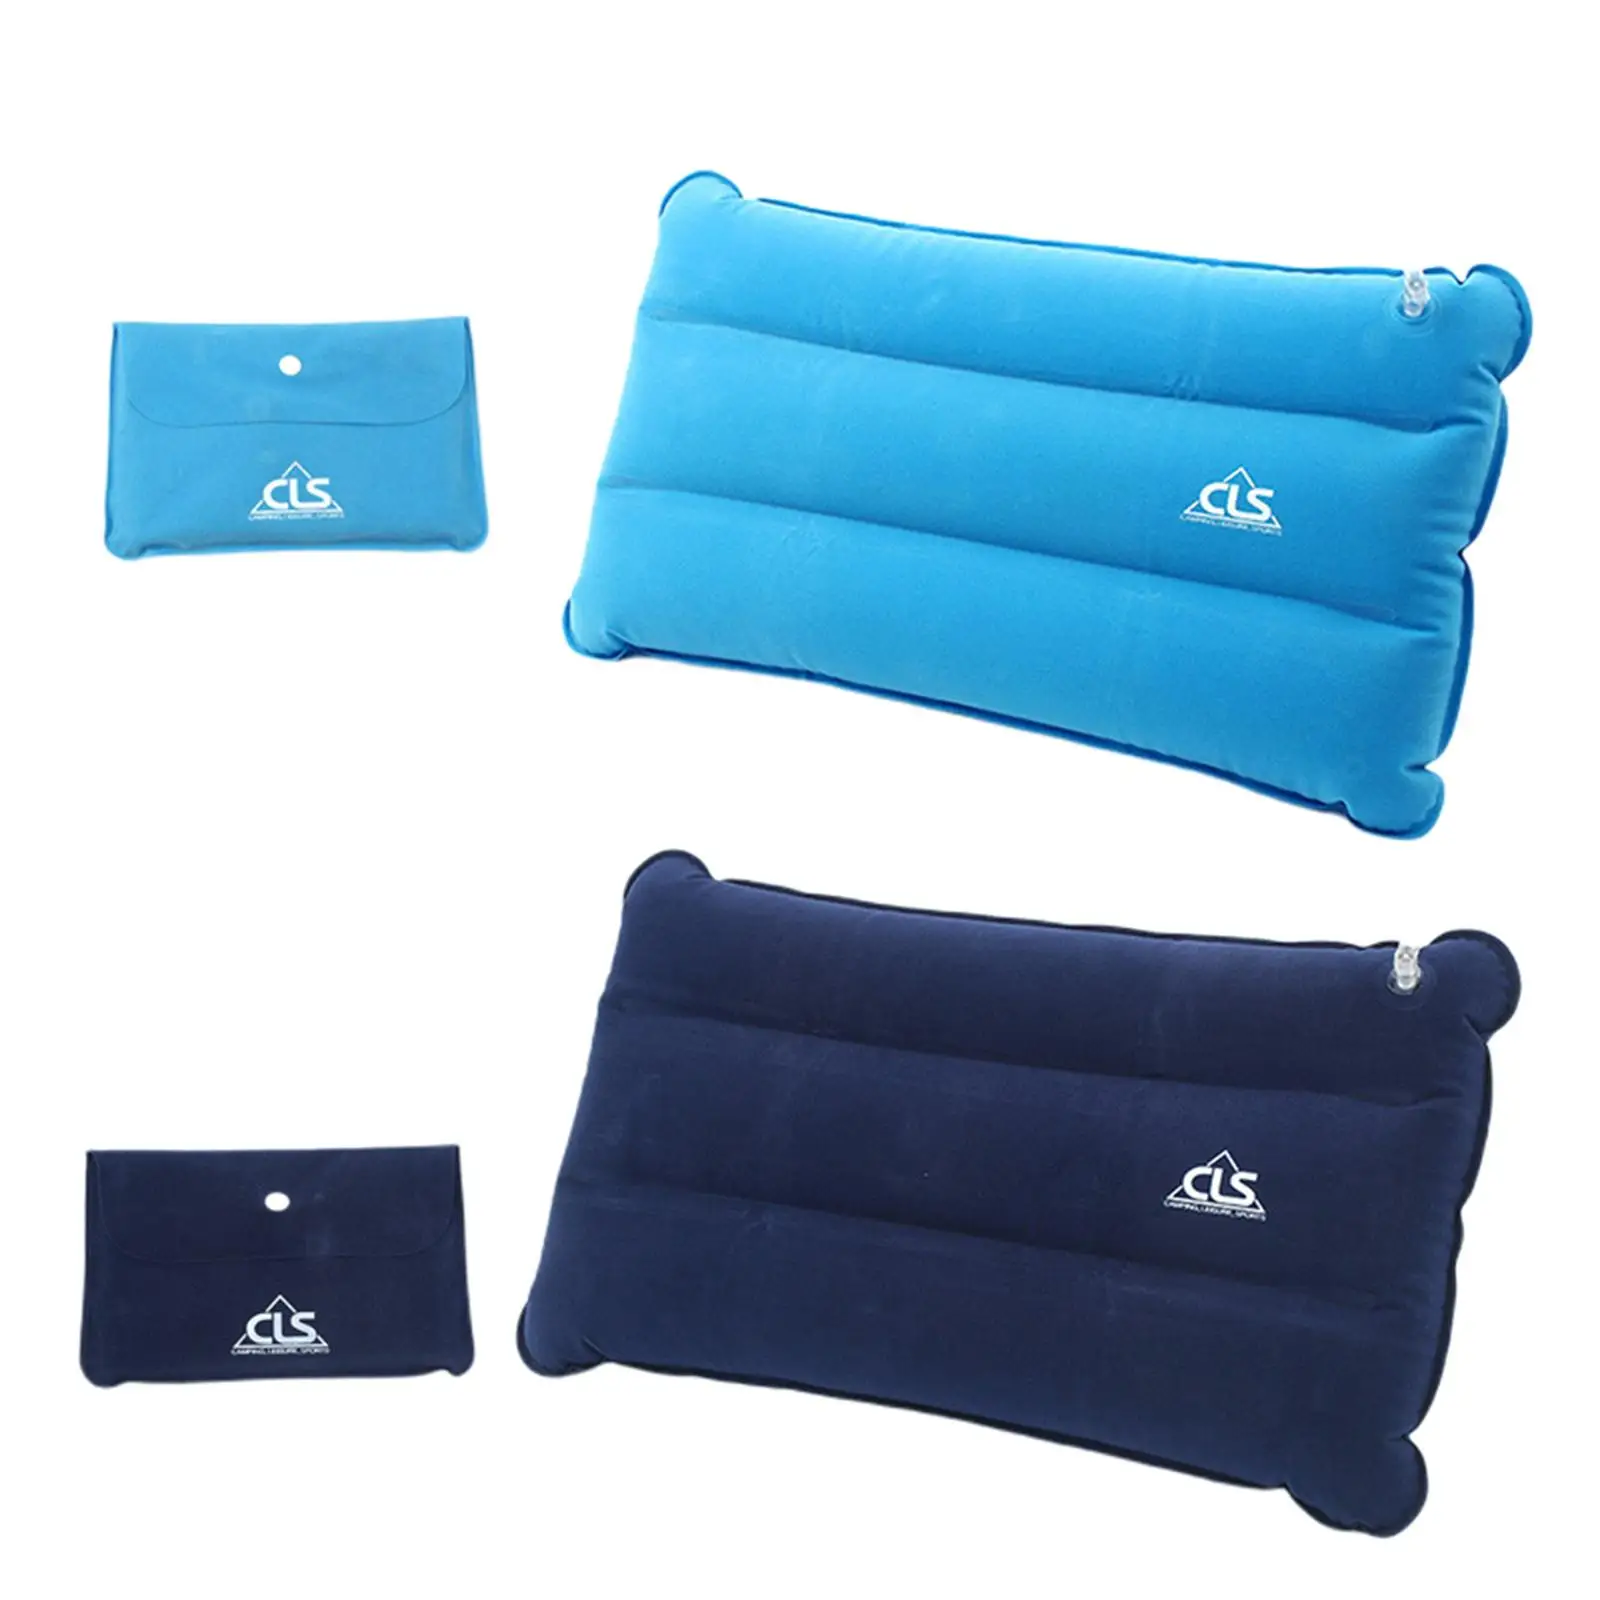 Inflated Pillows Compressed Folding Non-slip Pillow Suede Fabric Use For Travel Outdoor